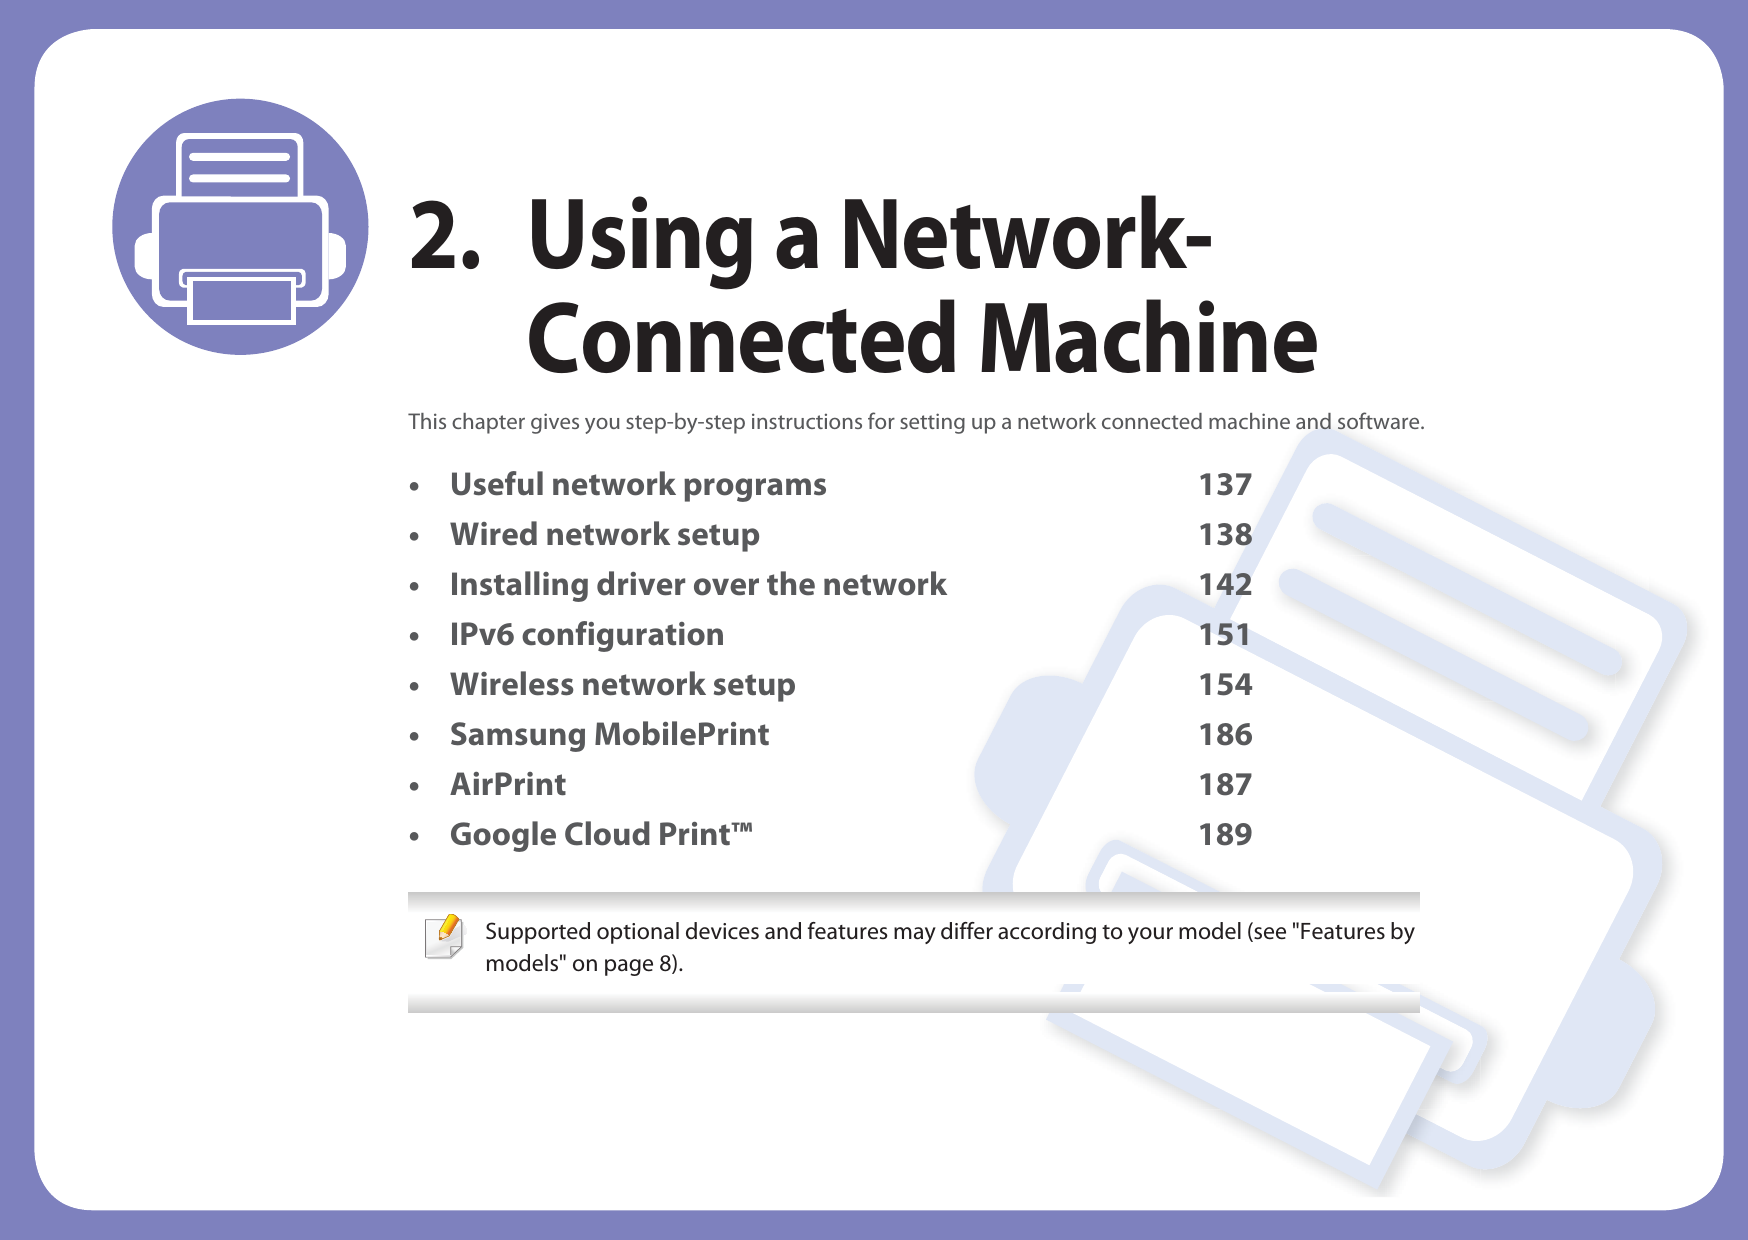 2. Using a Network-Connected MachineThis chapter gives you step-by-step instructions for setting up a network connected machine and software.• Useful network programs 137• Wired network setup 138• Installing driver over the network 142• IPv6 configuration 151• Wireless network setup 154• Samsung MobilePrint 186• AirPrint 187• Google Cloud Print™ 189 Supported optional devices and features may differ according to your model (see &quot;Features by models&quot; on page 8). 